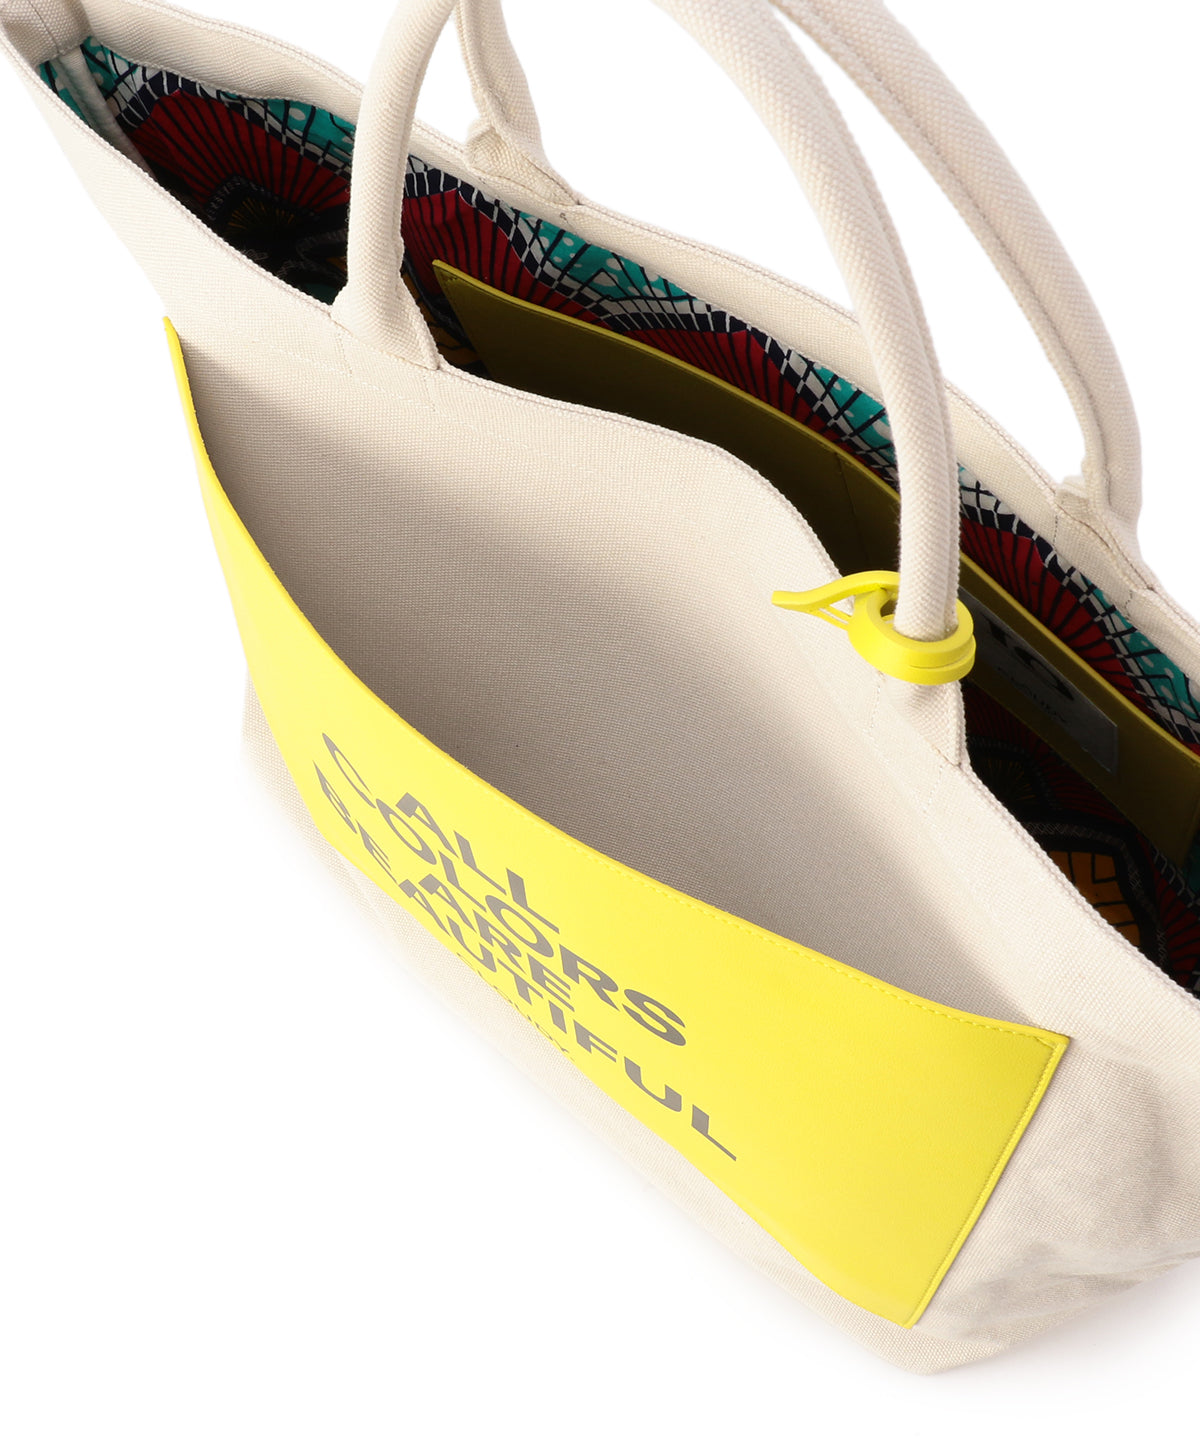 Canvas Tote (Large) YELLOW